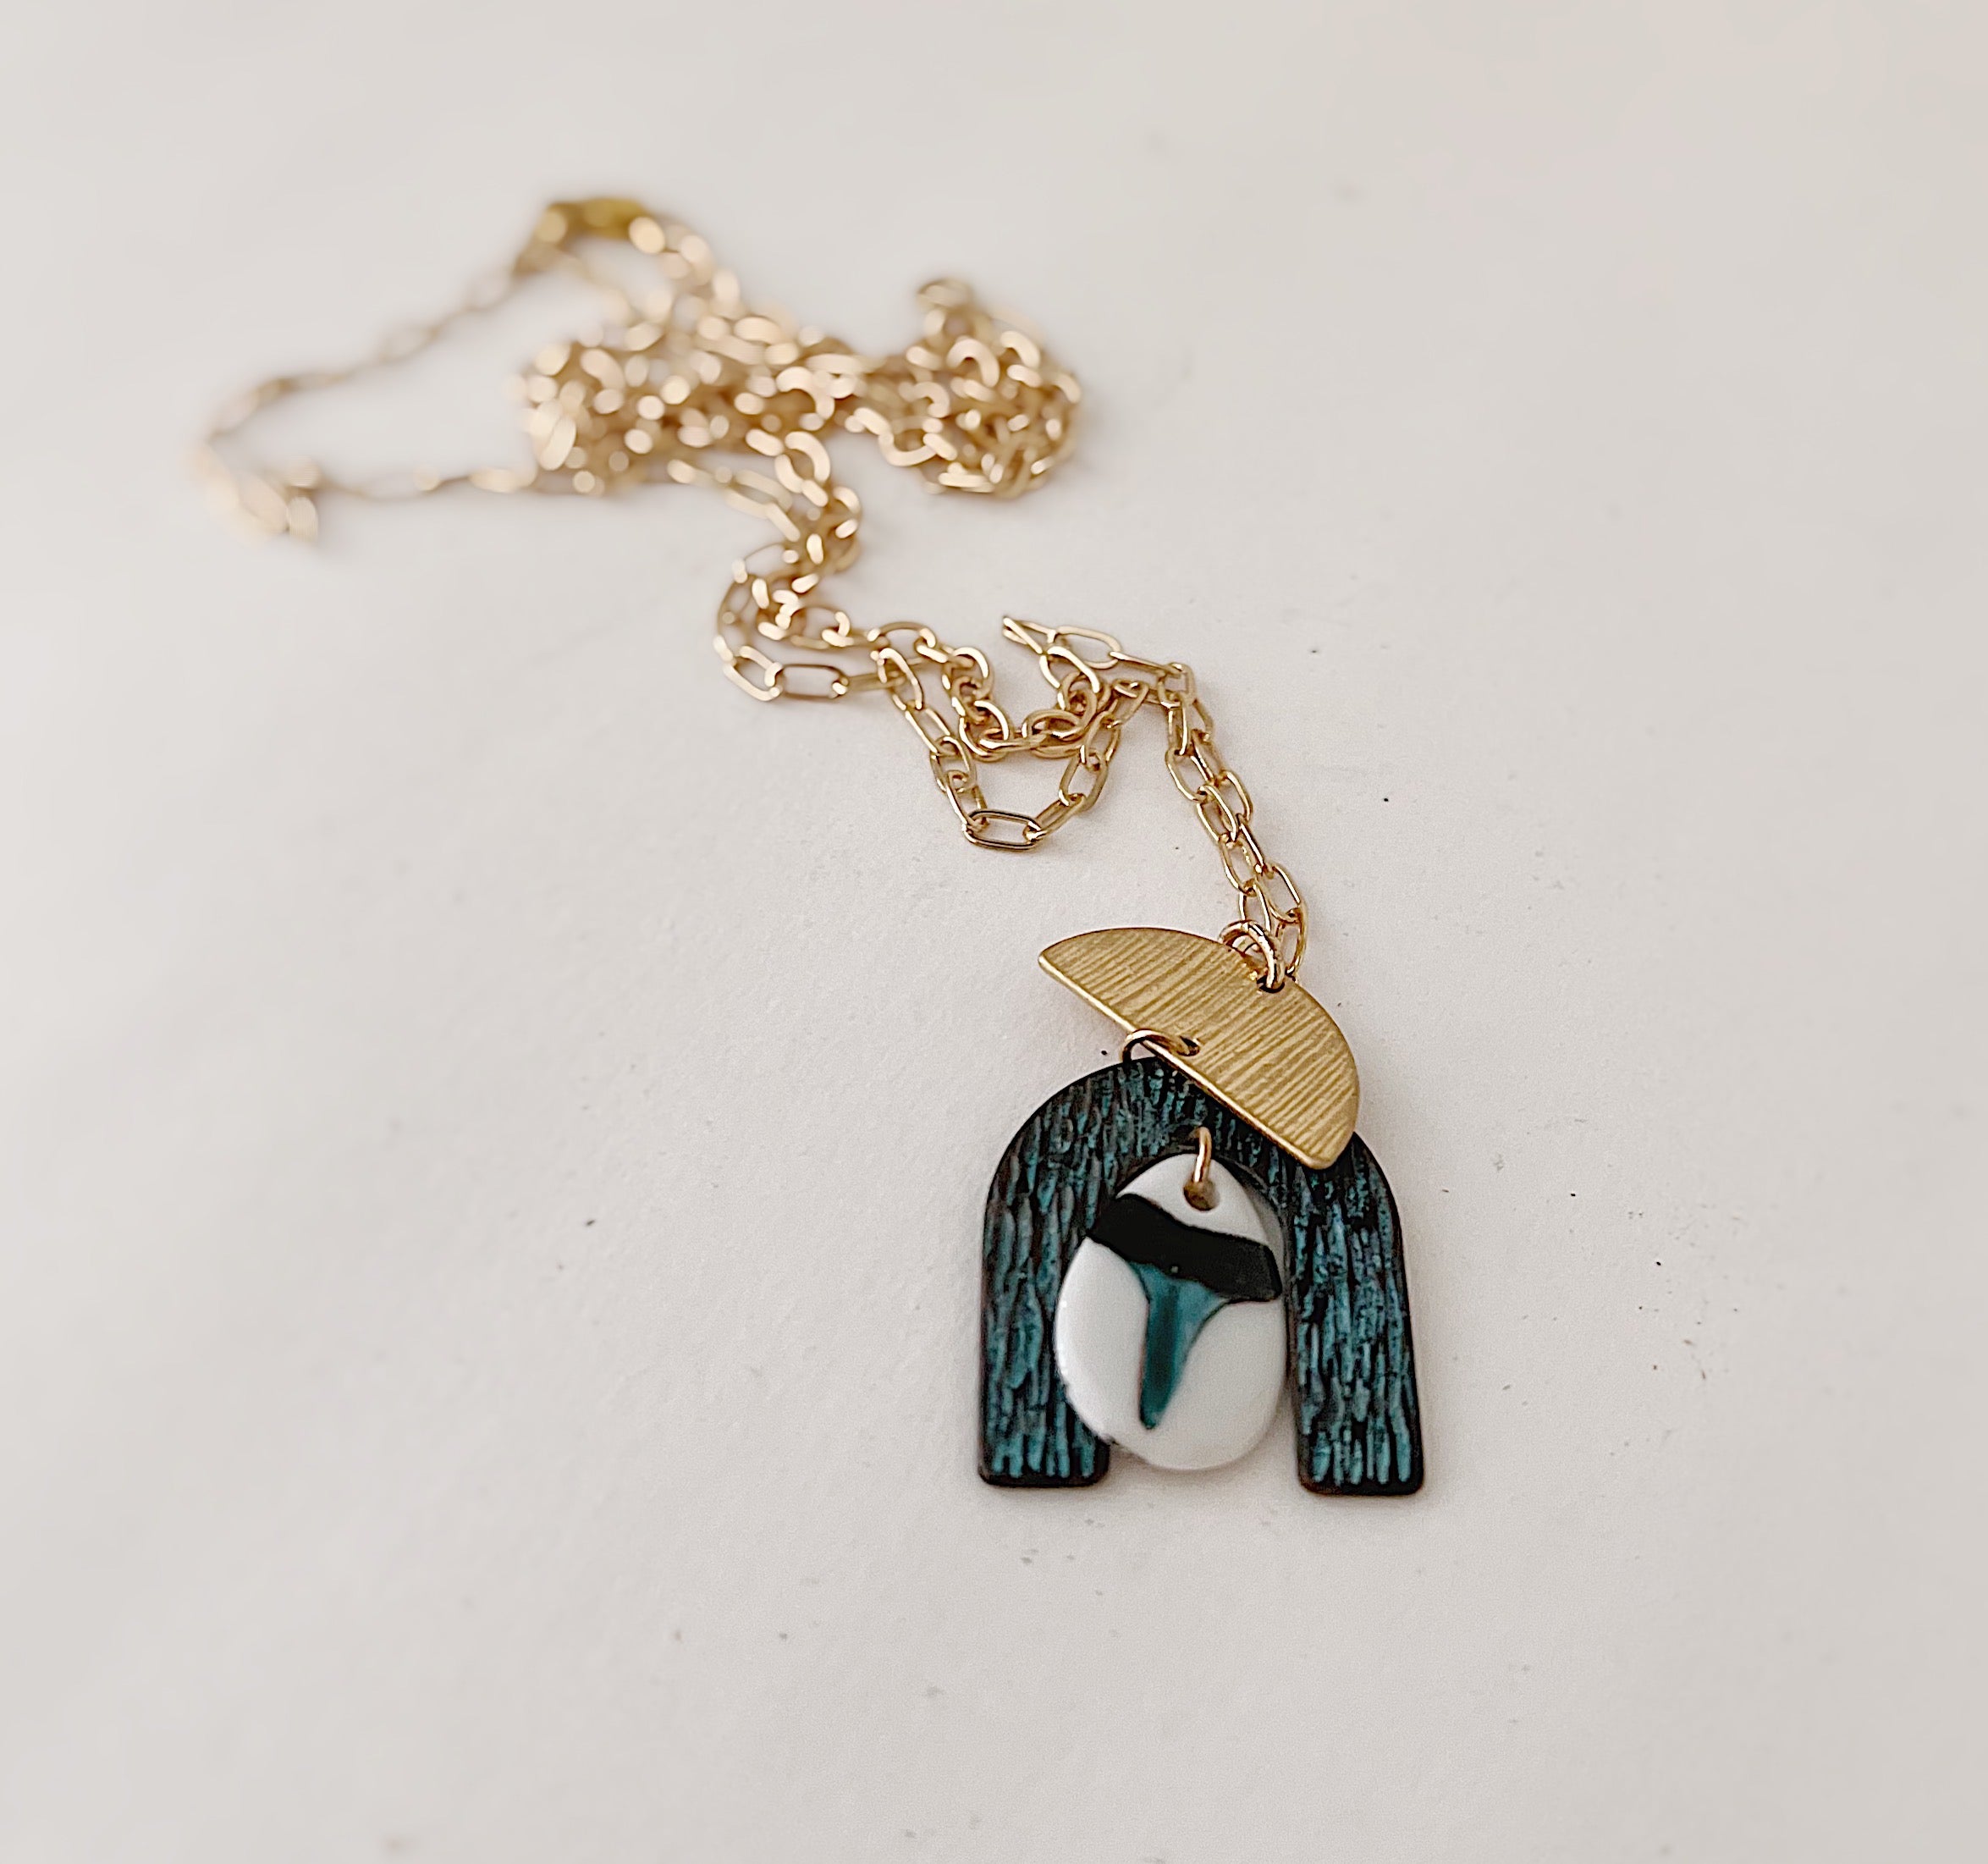 Coastal Necklace with a small shark tooth pendant